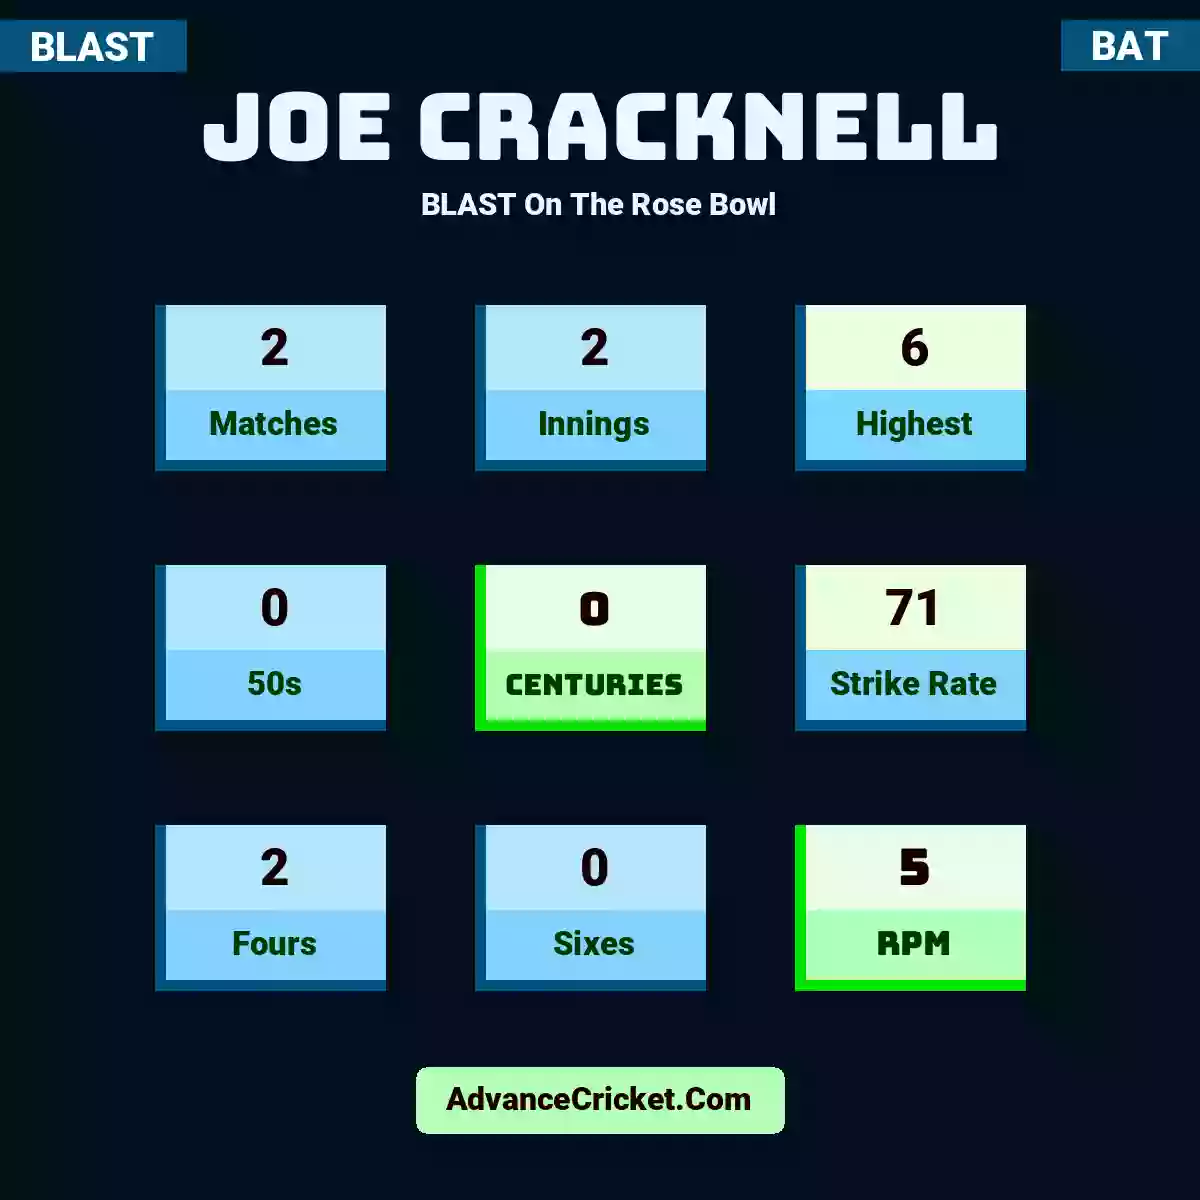 Joe Cracknell BLAST  On The Rose Bowl, Joe Cracknell played 2 matches, scored 6 runs as highest, 0 half-centuries, and 0 centuries, with a strike rate of 71. J.Cracknell hit 2 fours and 0 sixes, with an RPM of 5.